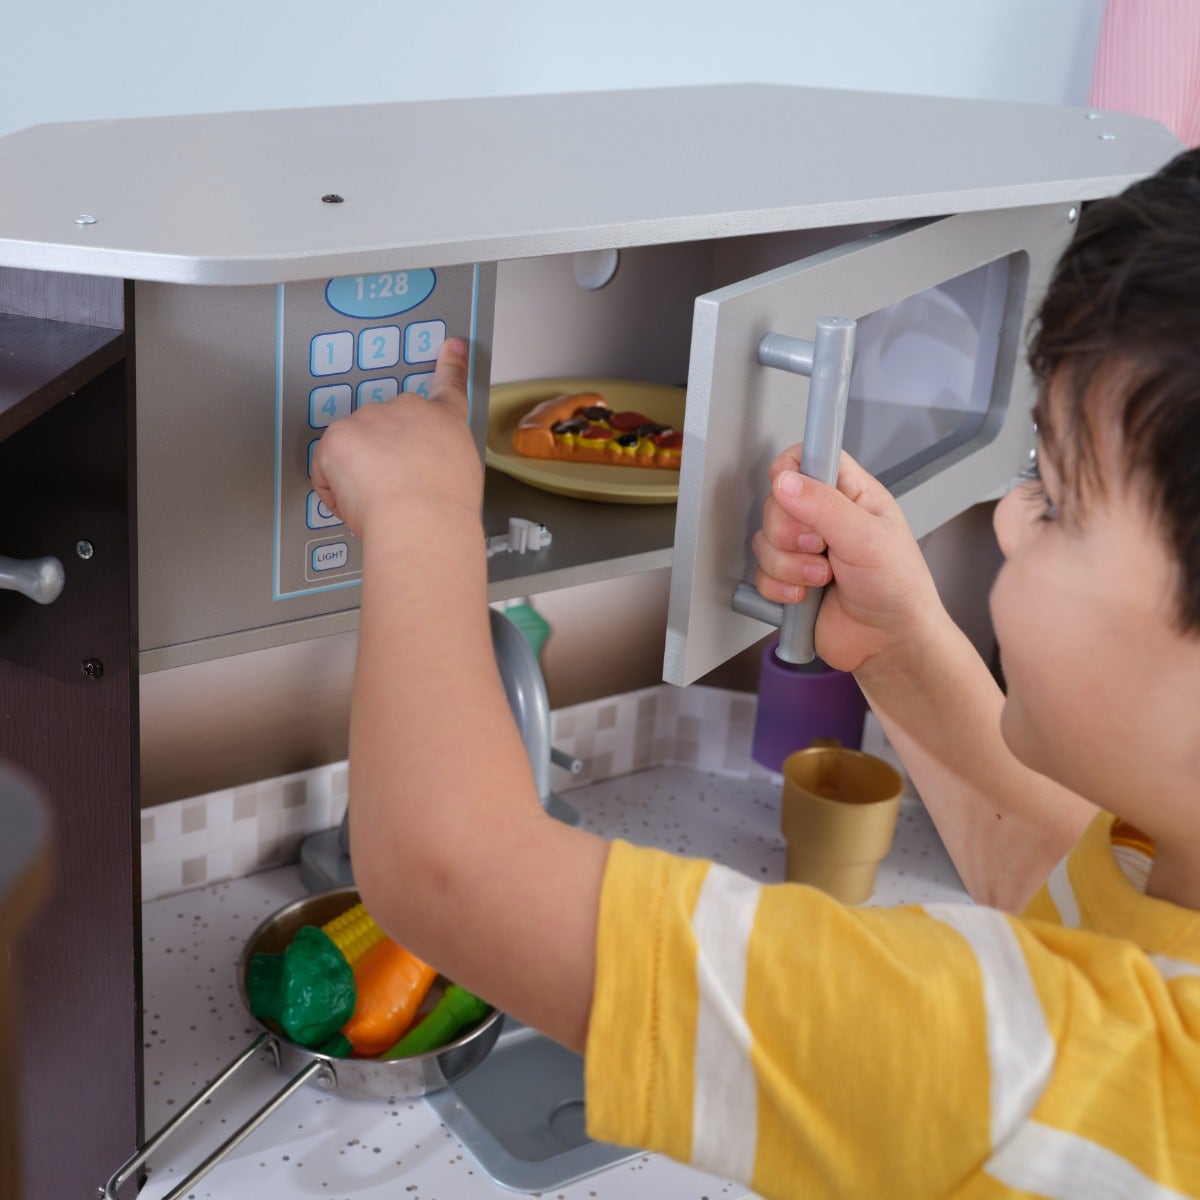 Hands-On Fun! There’s plenty of buttons to press, knobs to turn and handles to pull for little hands to stay busy.